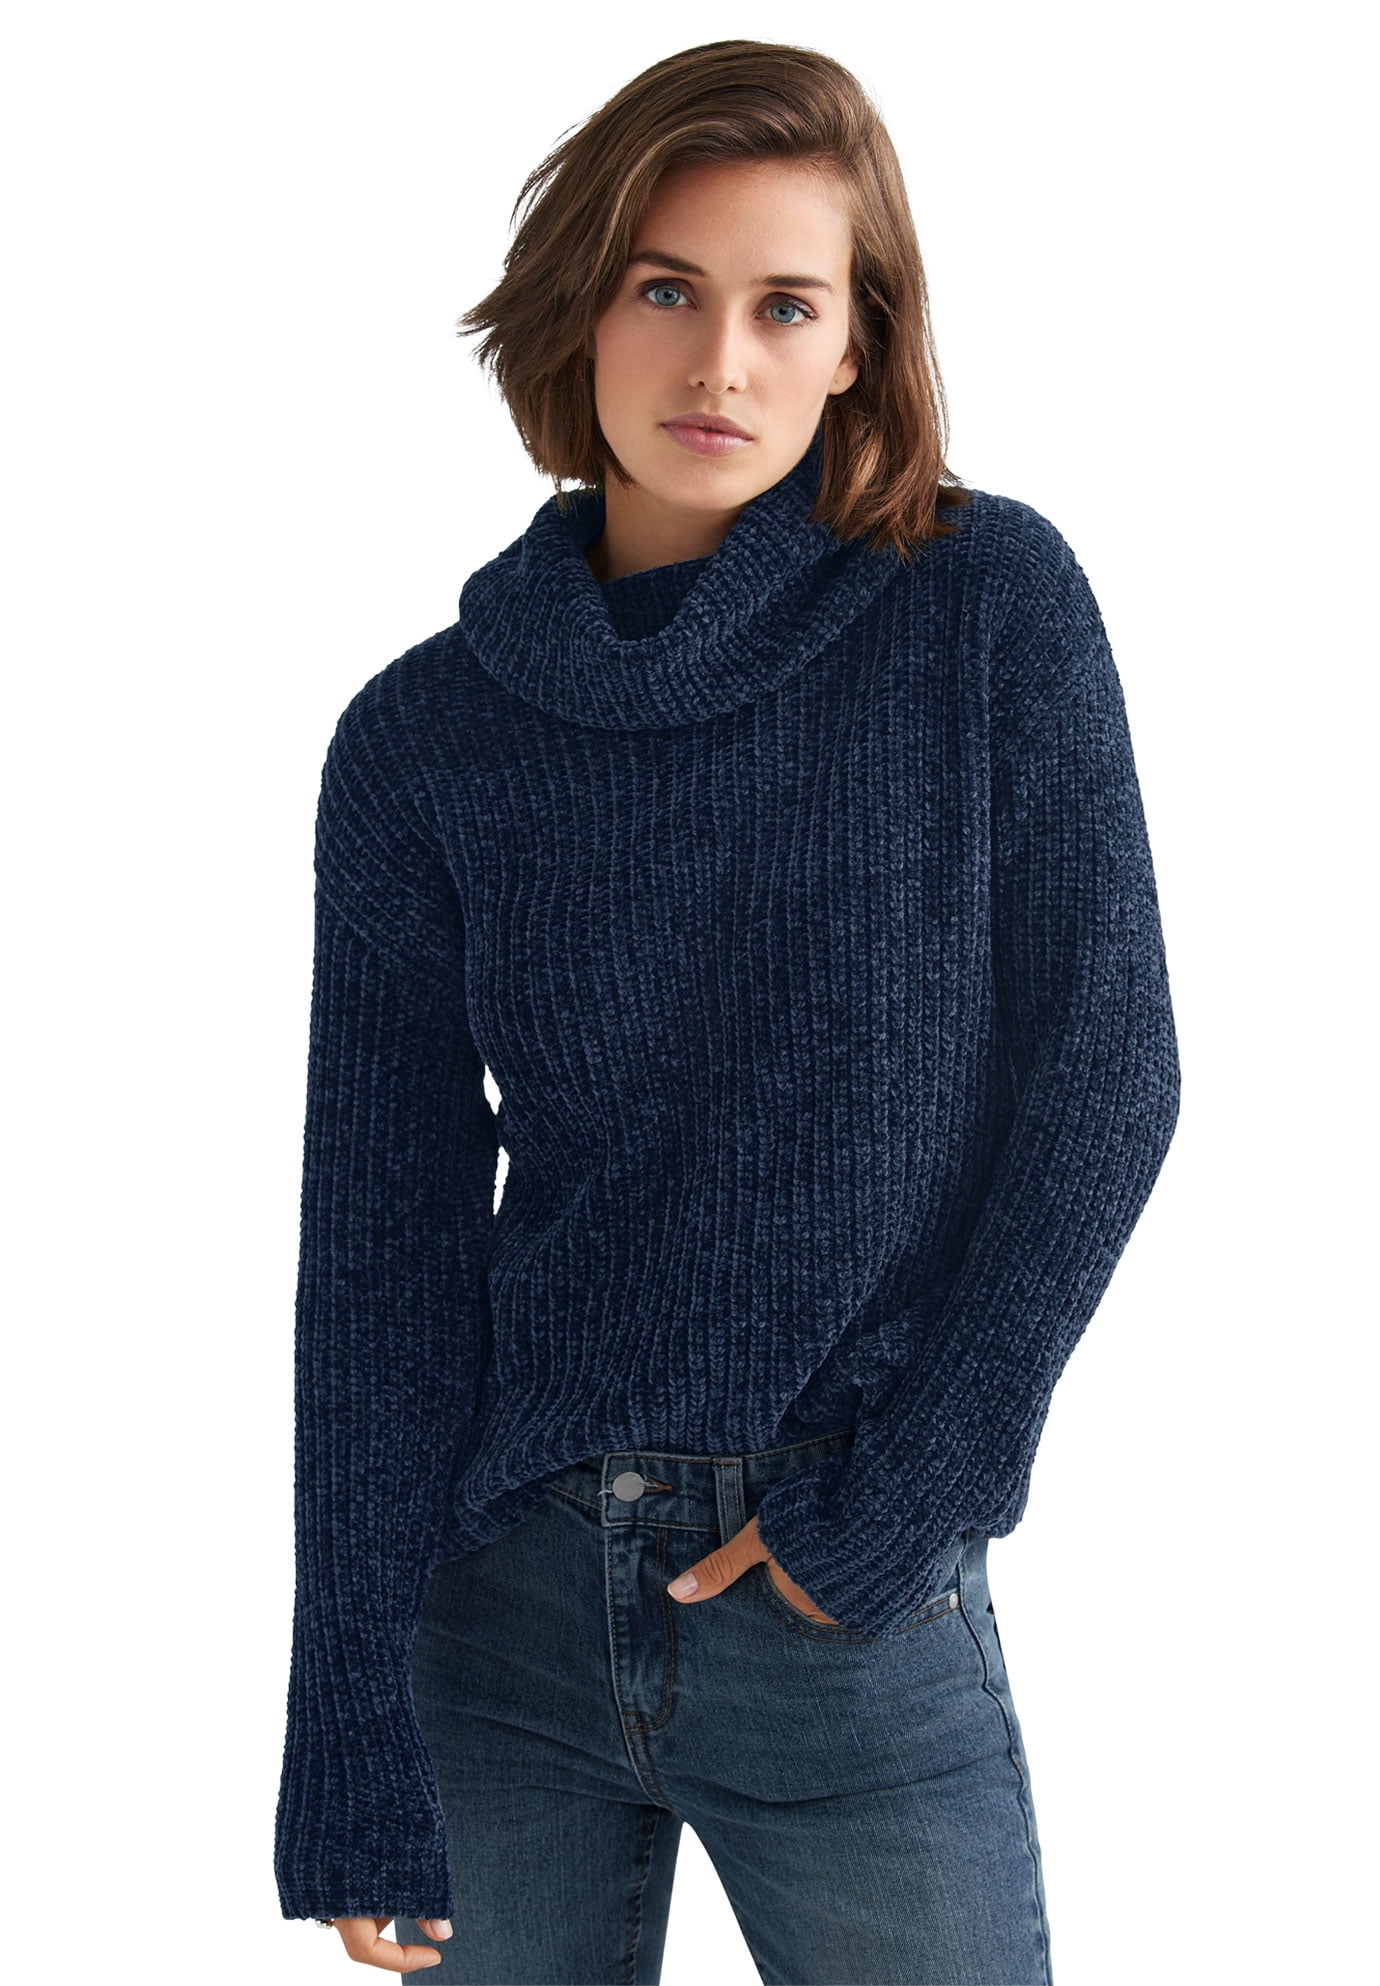 Things to Looks For Using Proteck'd Womens Sweaters – Telegraph